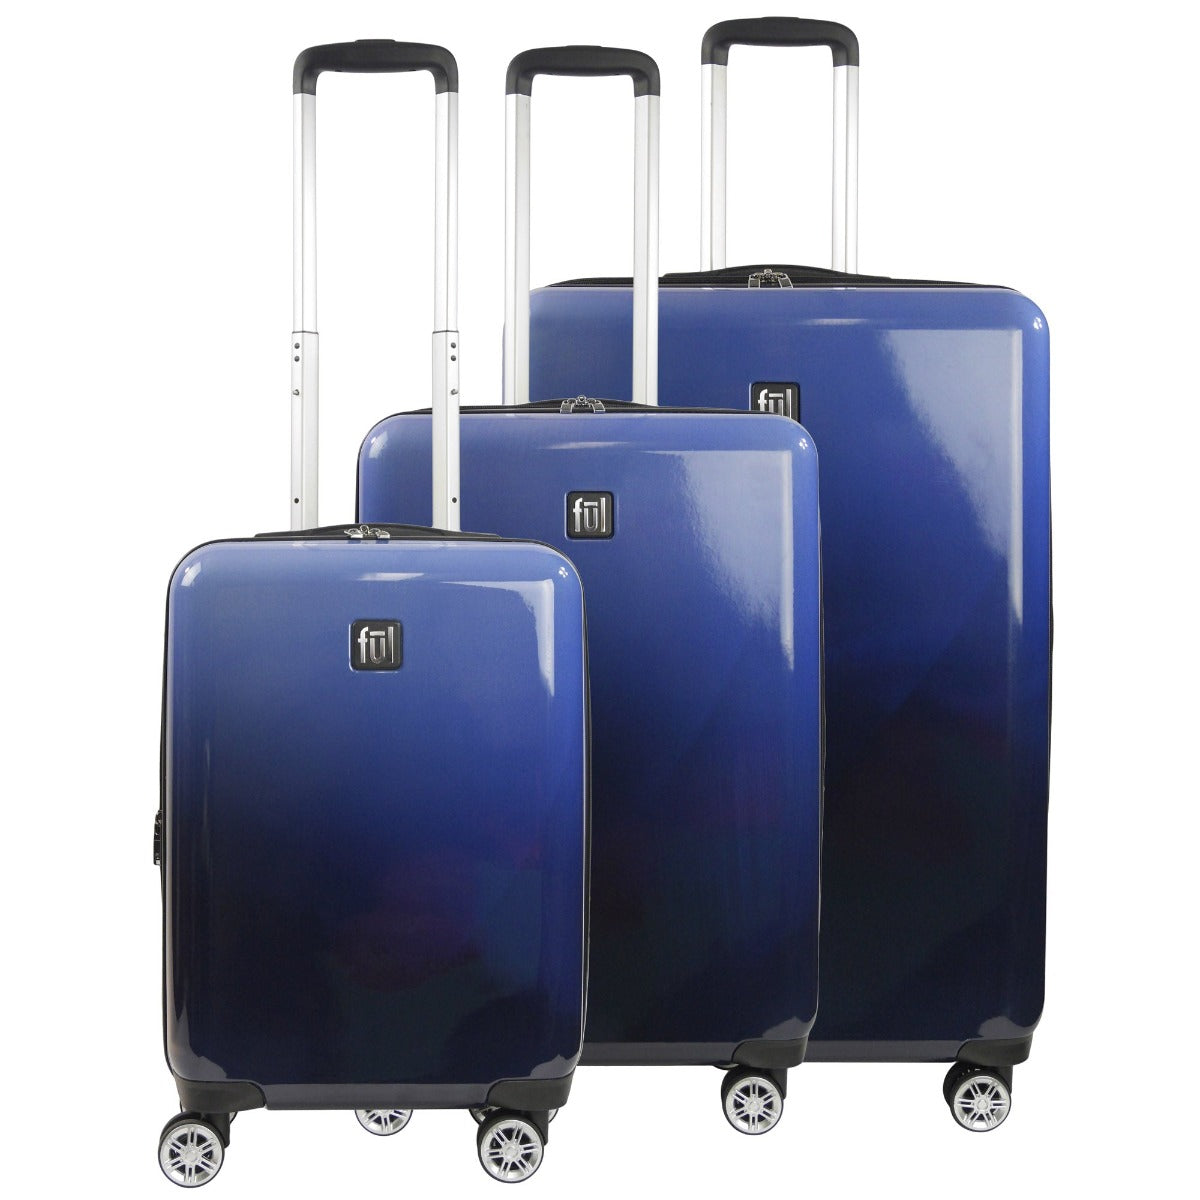 Ful Impulse Ombre Hard-sided Spinner Suitcases Luggage 3pc set, Blue